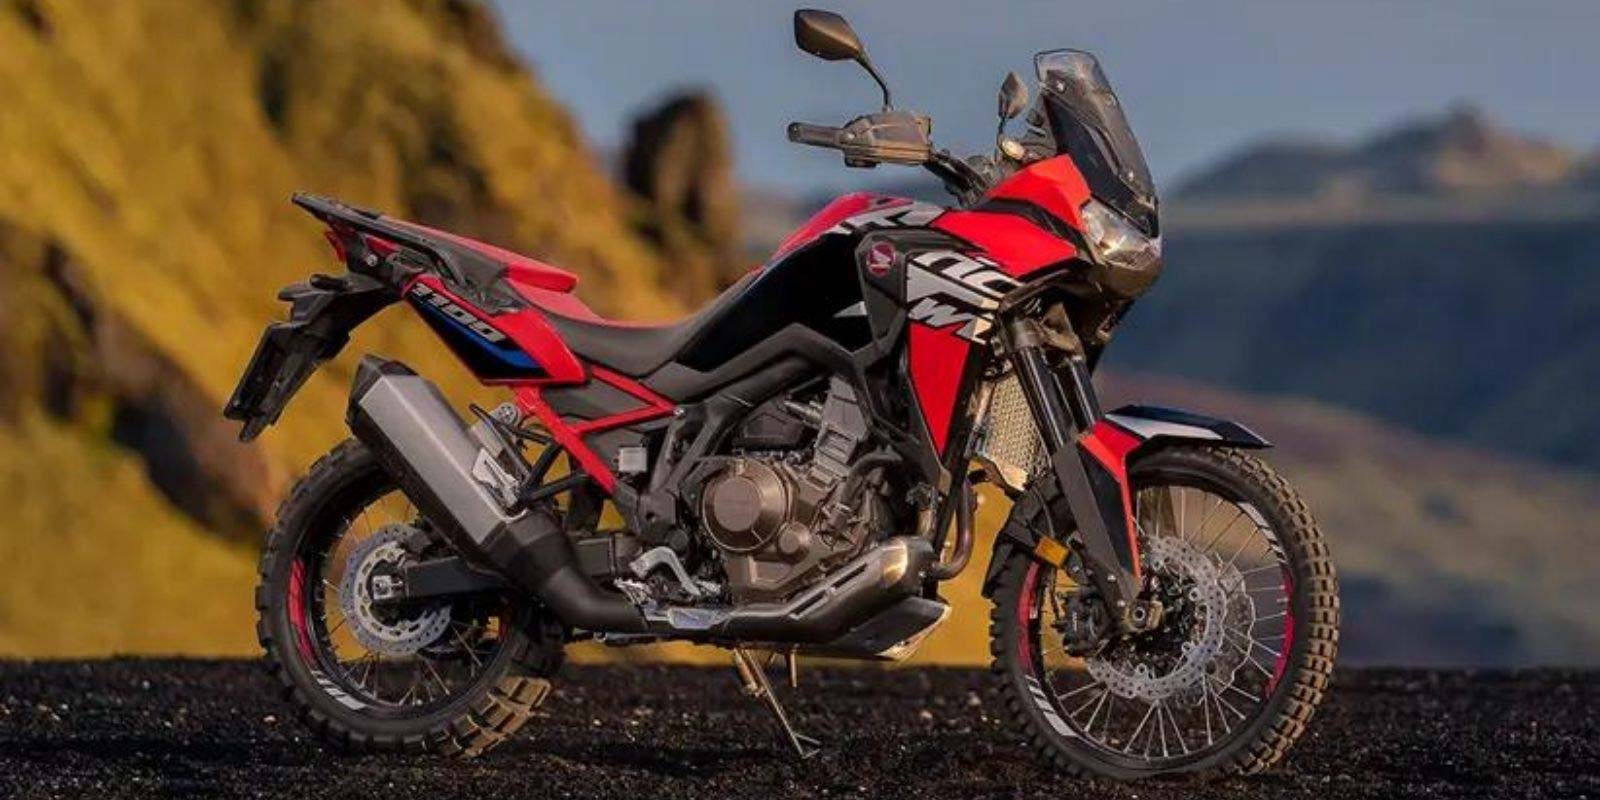 All New Africa Twin to Enter the Indian Market!